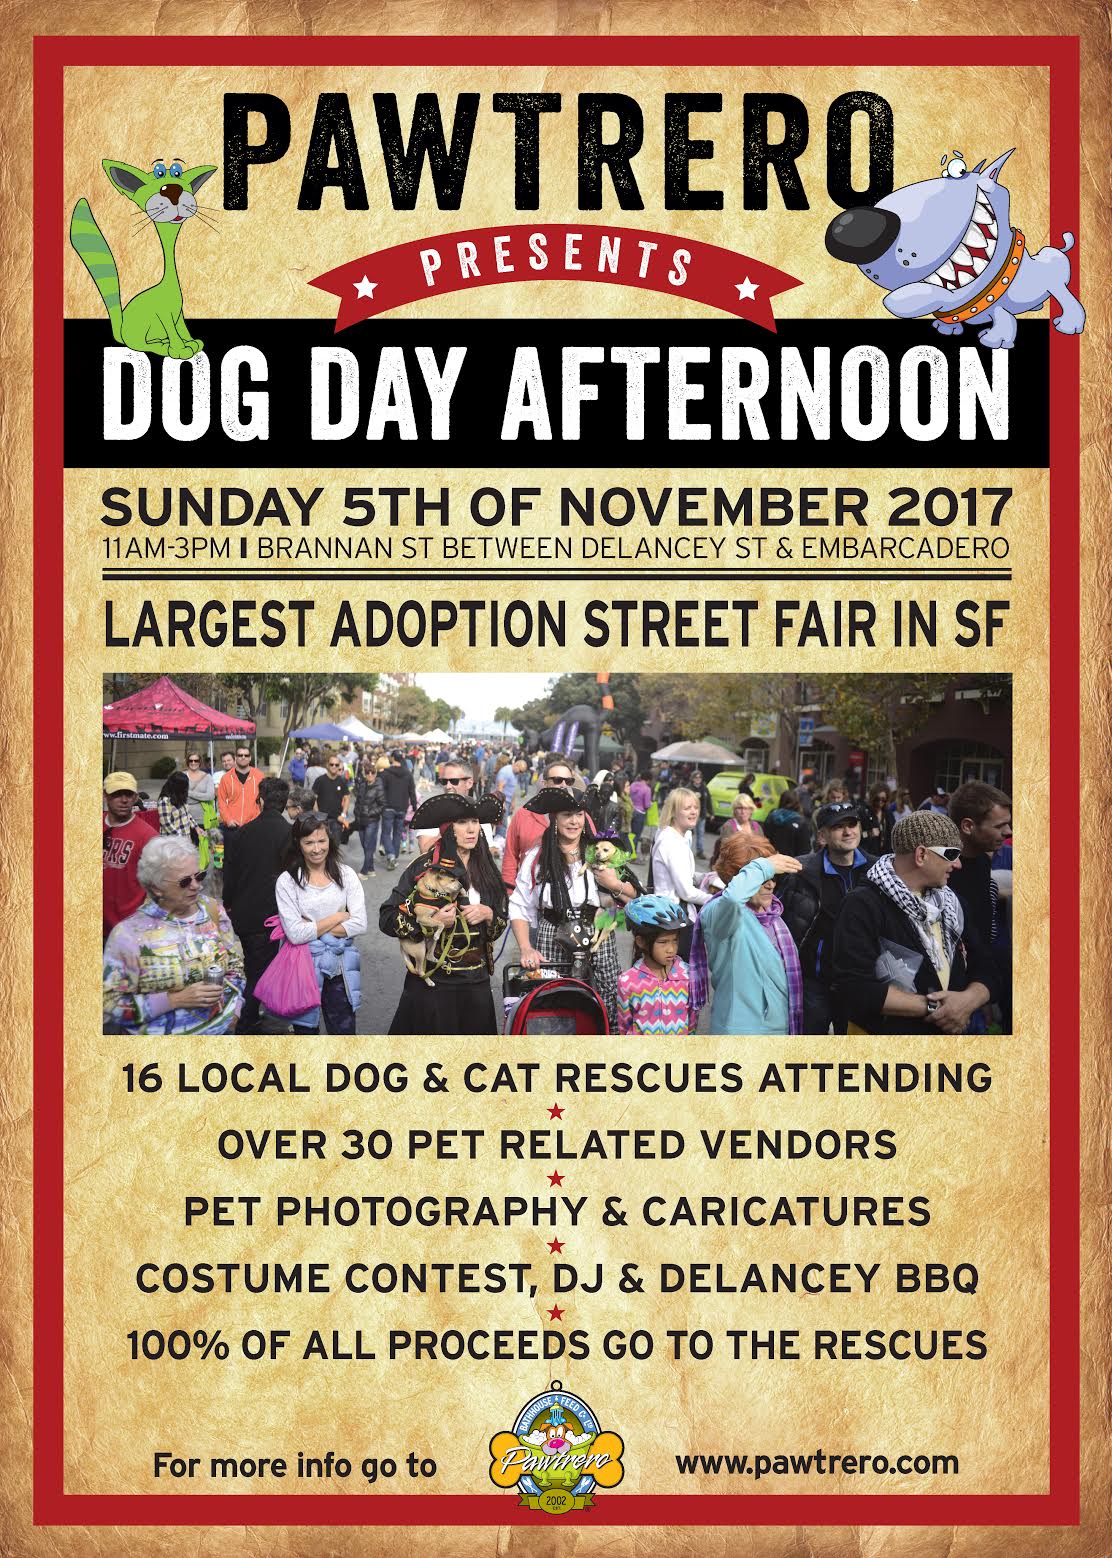 photo of poster for Pawtrero event Dog Day Afternoon on November 5, 2017